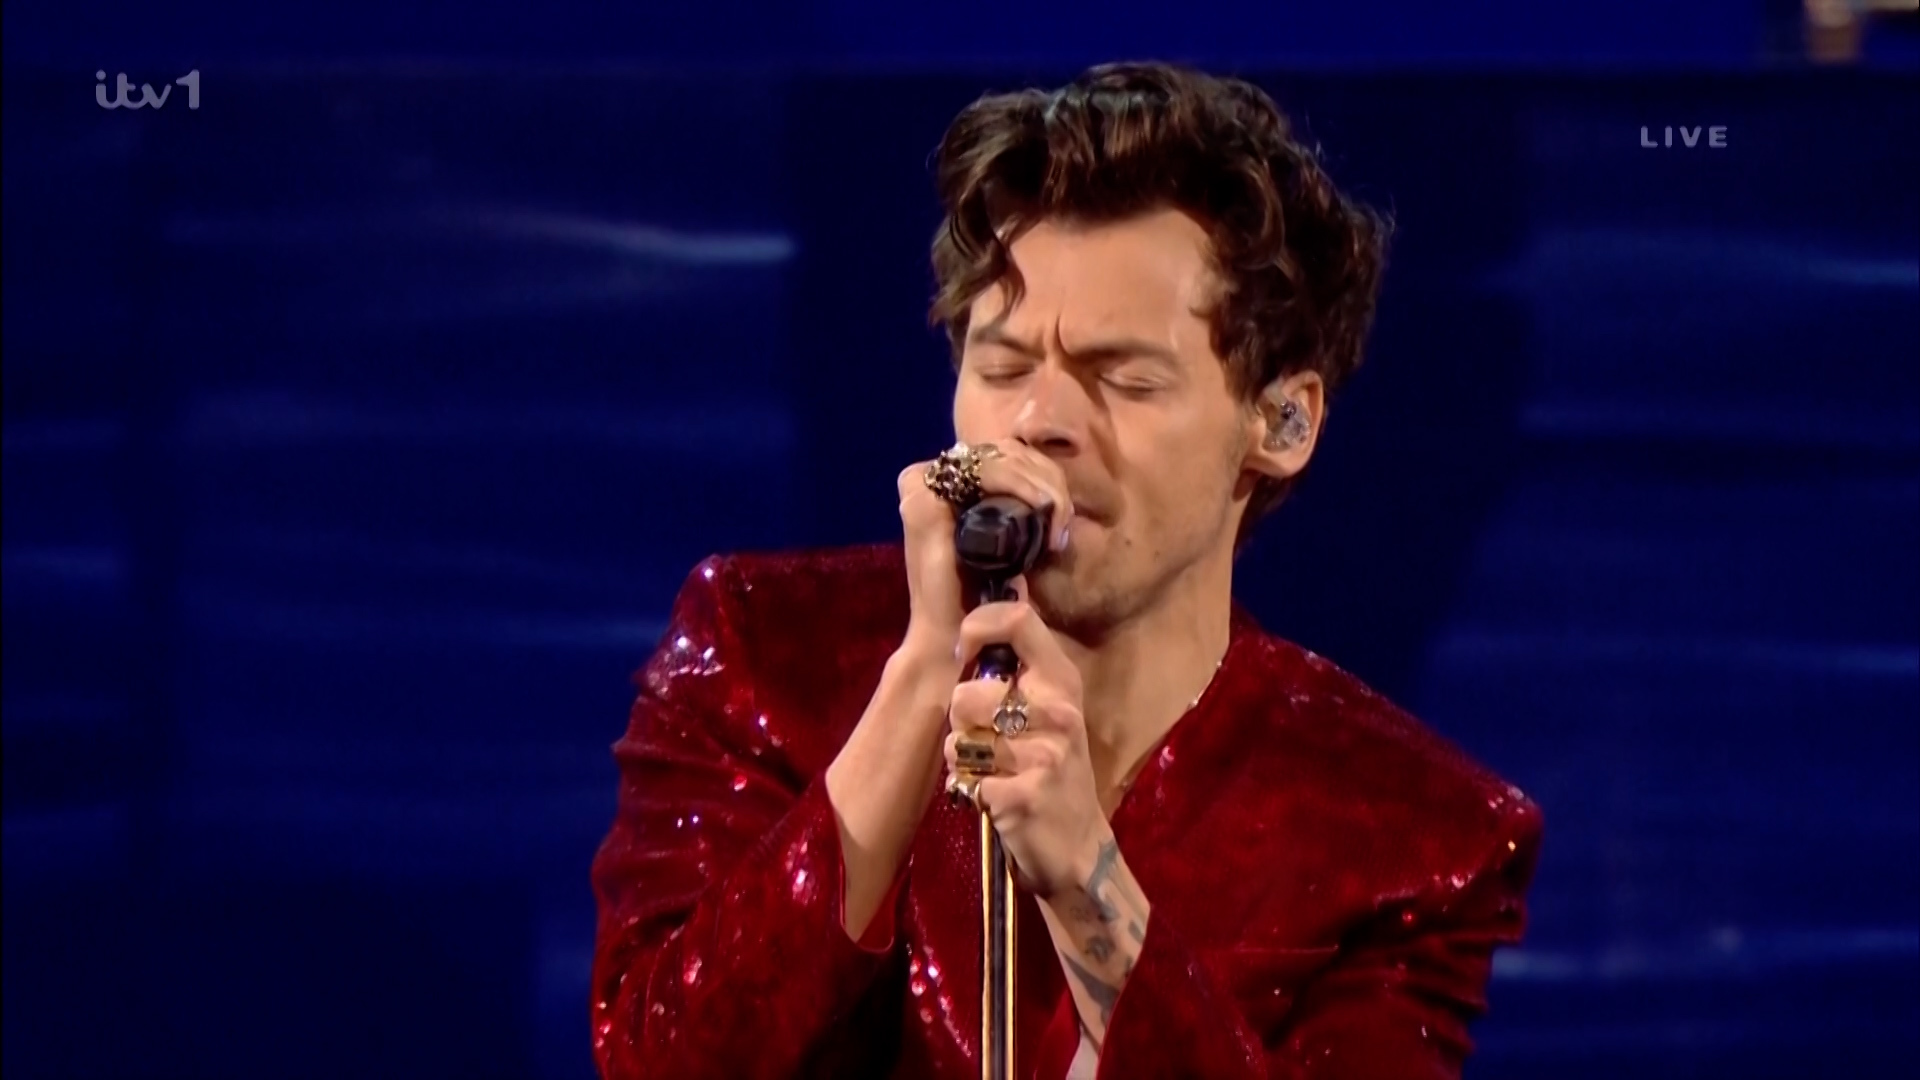 Harry Styles spectacular performance of As It Was at the BRIT Awards